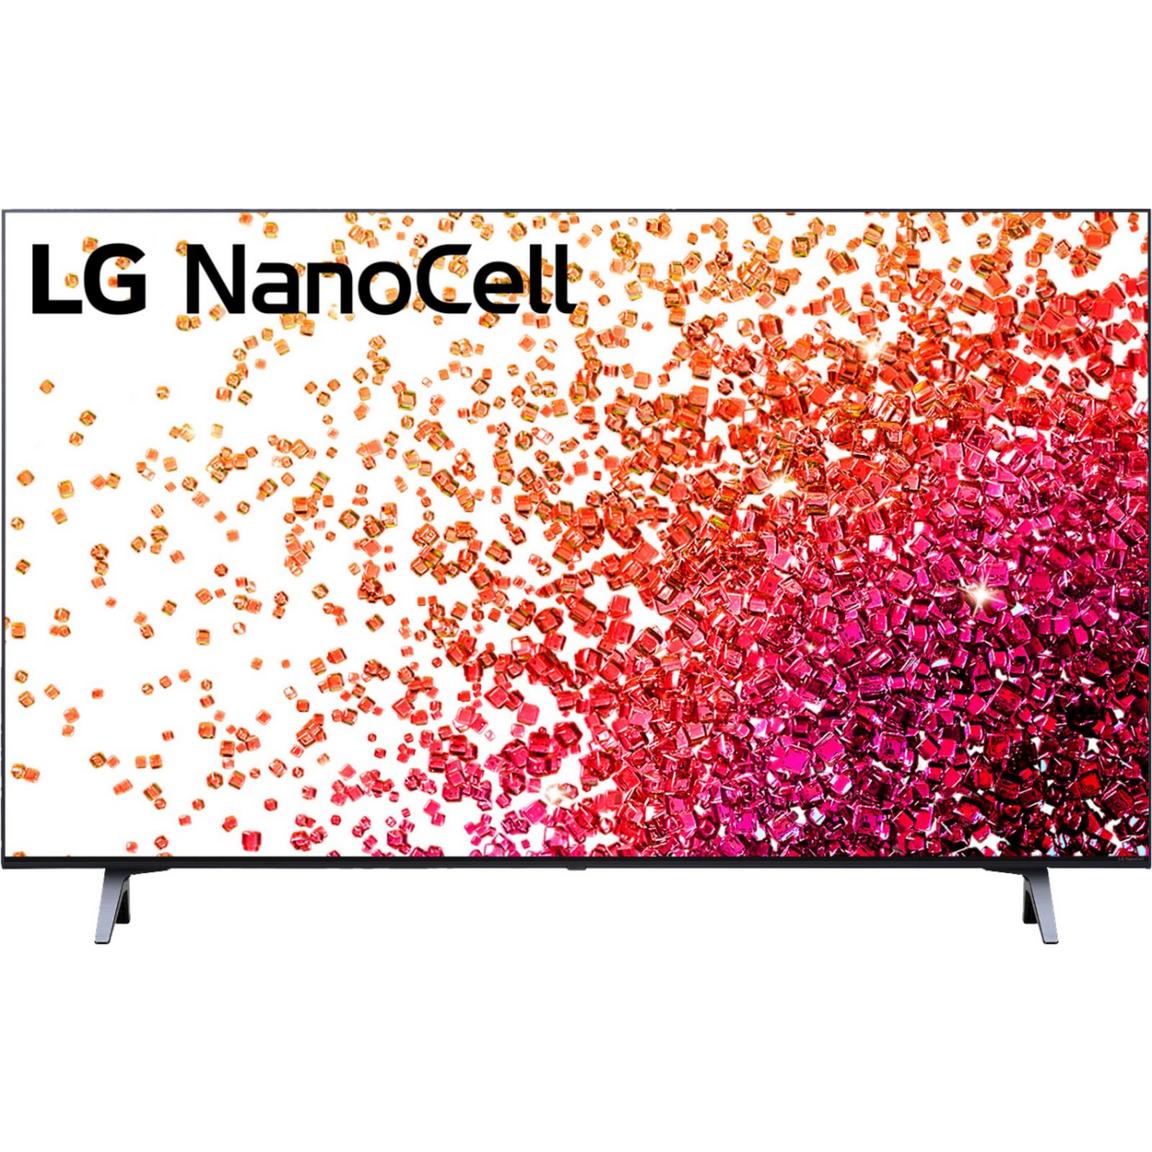 LG 50 Inch NanoCell 75 Series Tv 50NANO75UPA: $415 with a free $45 GameStop gift card